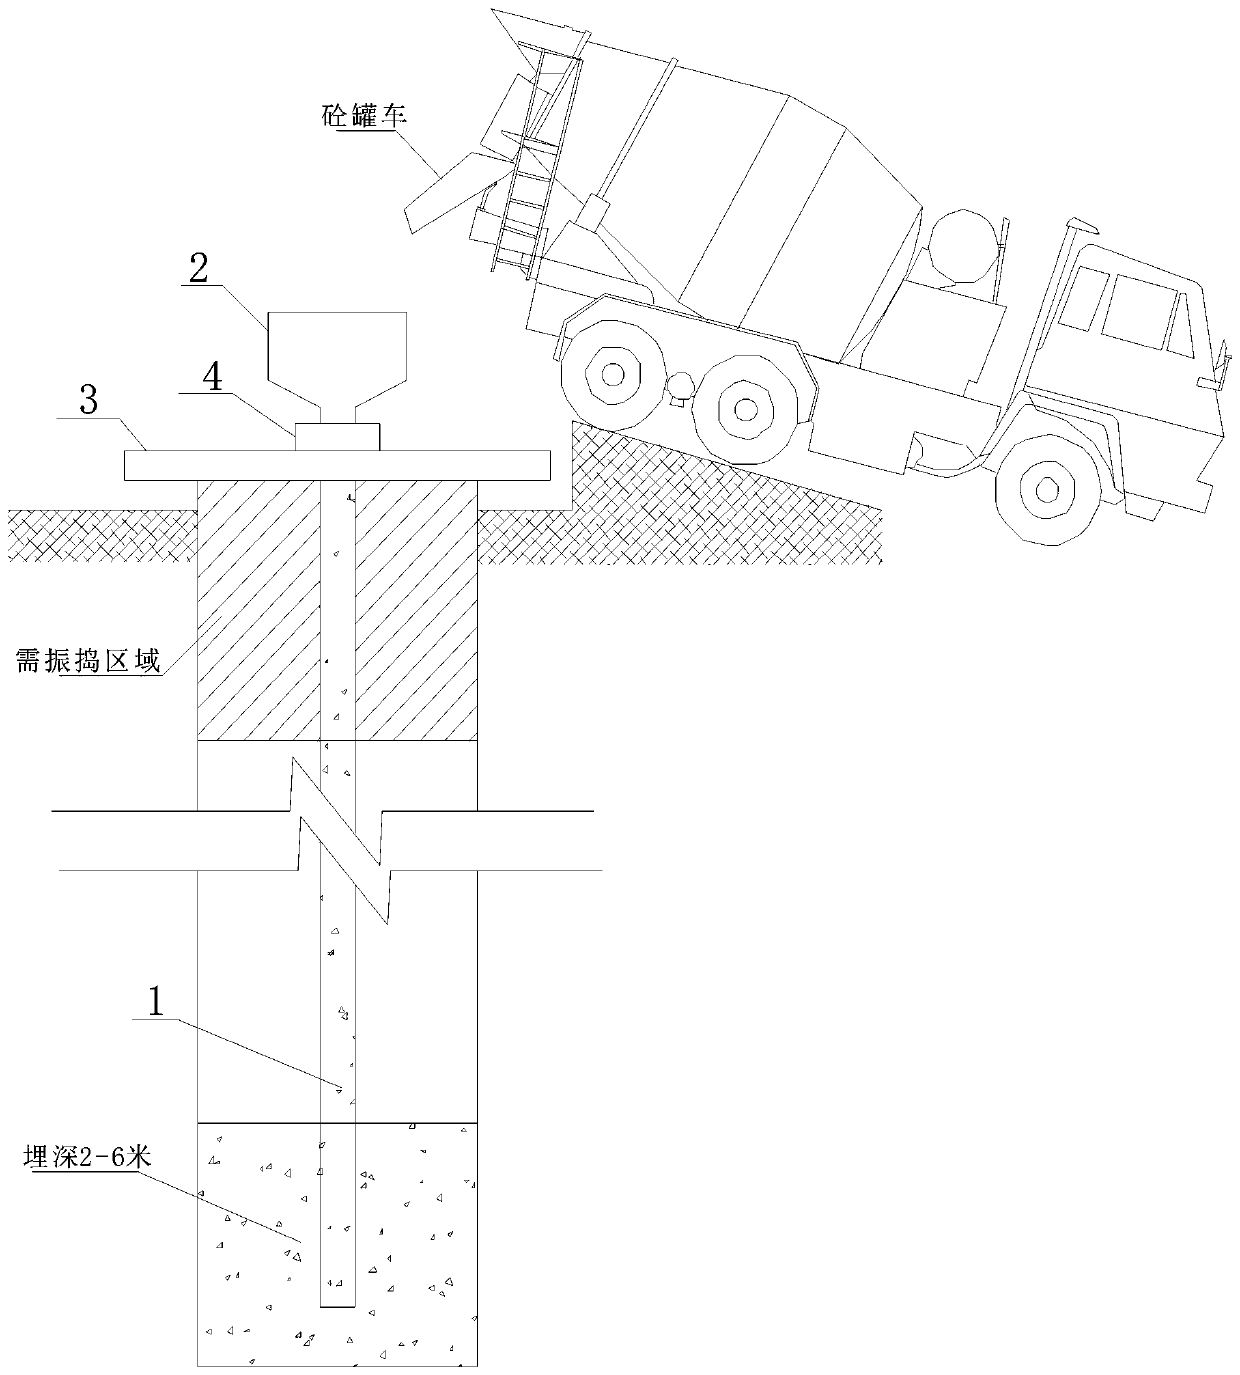 Pouring method of manual digging pile body concrete by using anhydrous underwater concrete pouring method